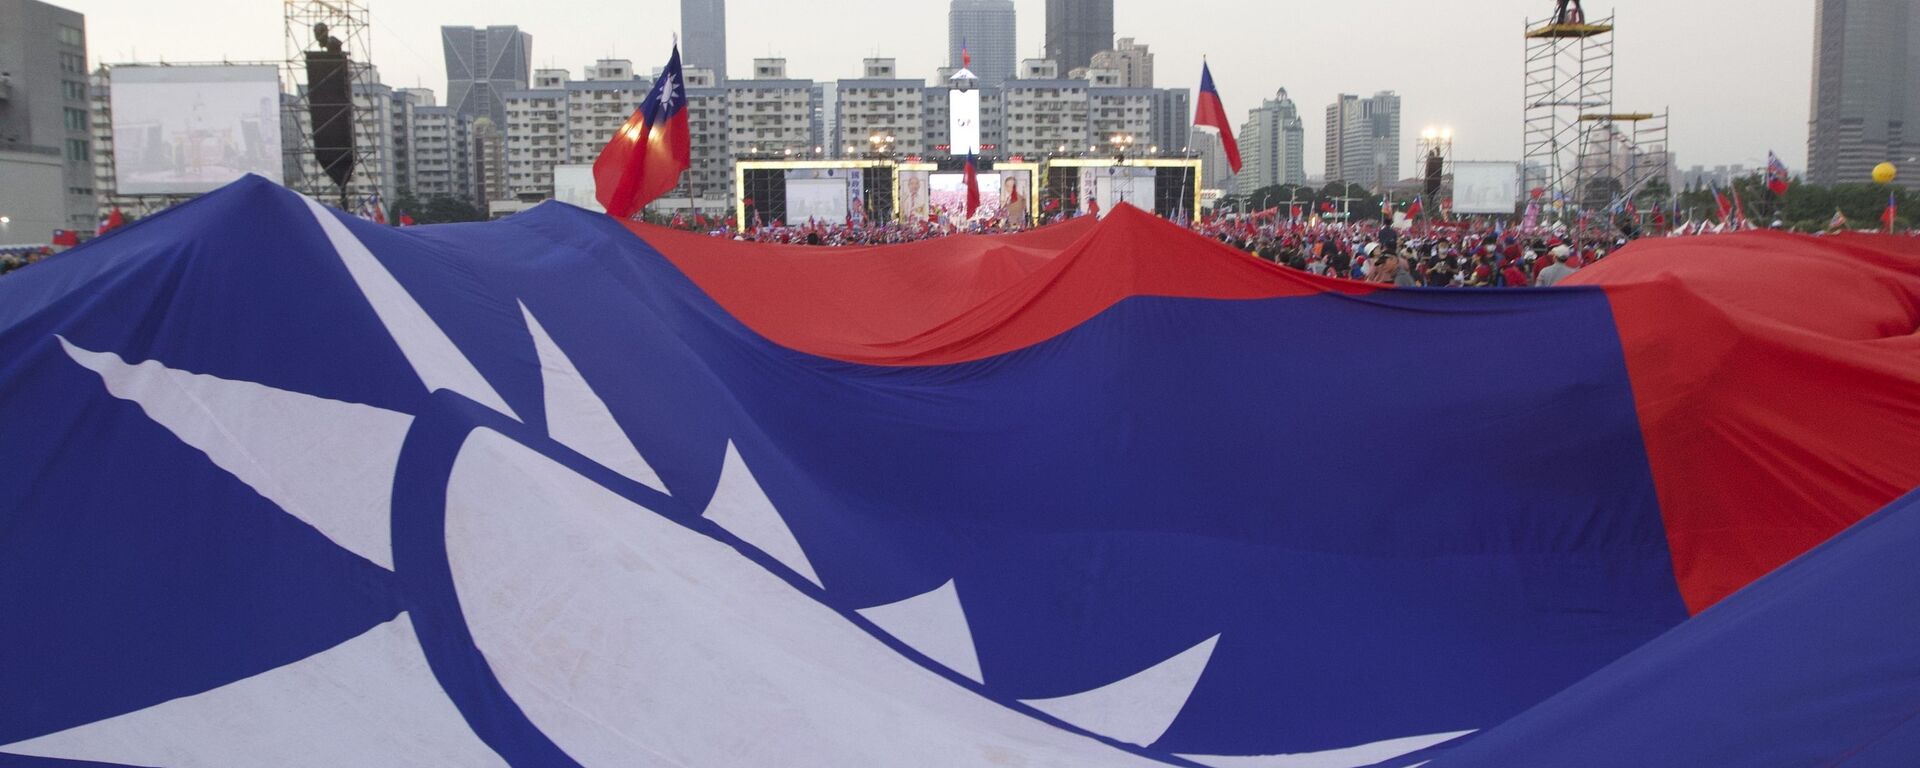 Supporters of Taiwan's 2020 presidential election candidate for the KMT, or Nationalist Party, Han Kuo-yu pass along a giant Taiwanese flag for the start of a campaign rally in southern Taiwan's Kaohsiung city on Friday, Jan 10, 2020 - Sputnik International, 1920, 08.08.2023